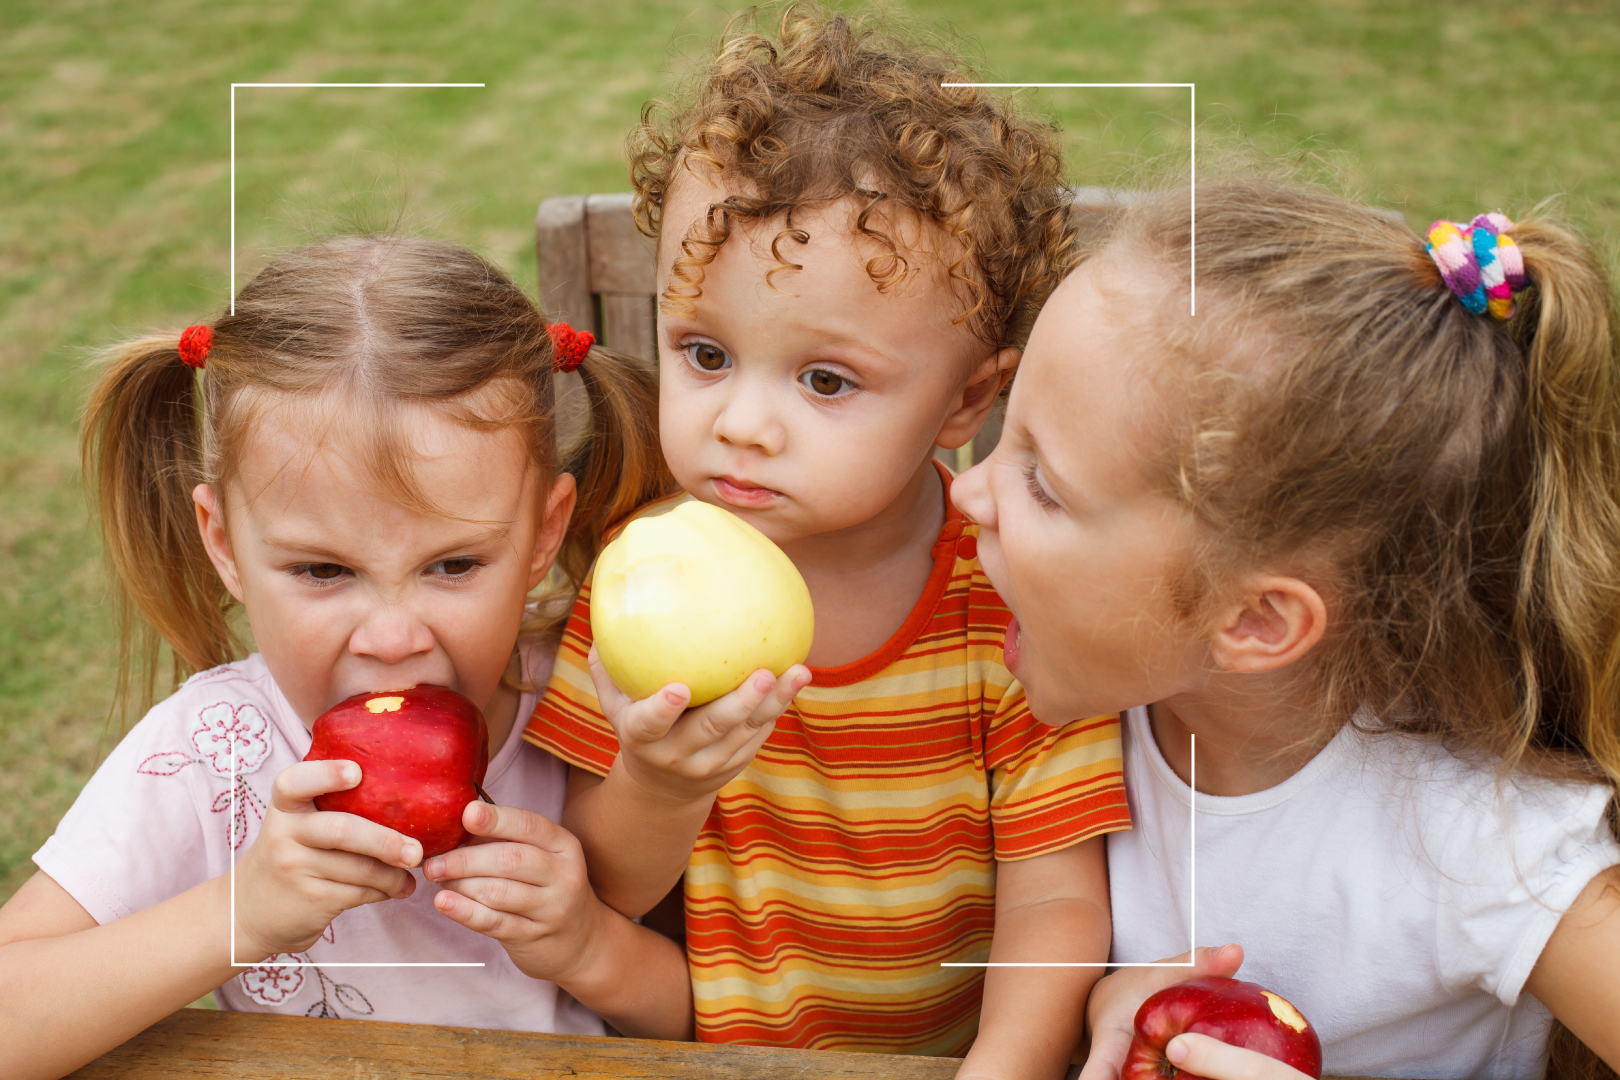 3 toddlers eating red apples at a picnic table